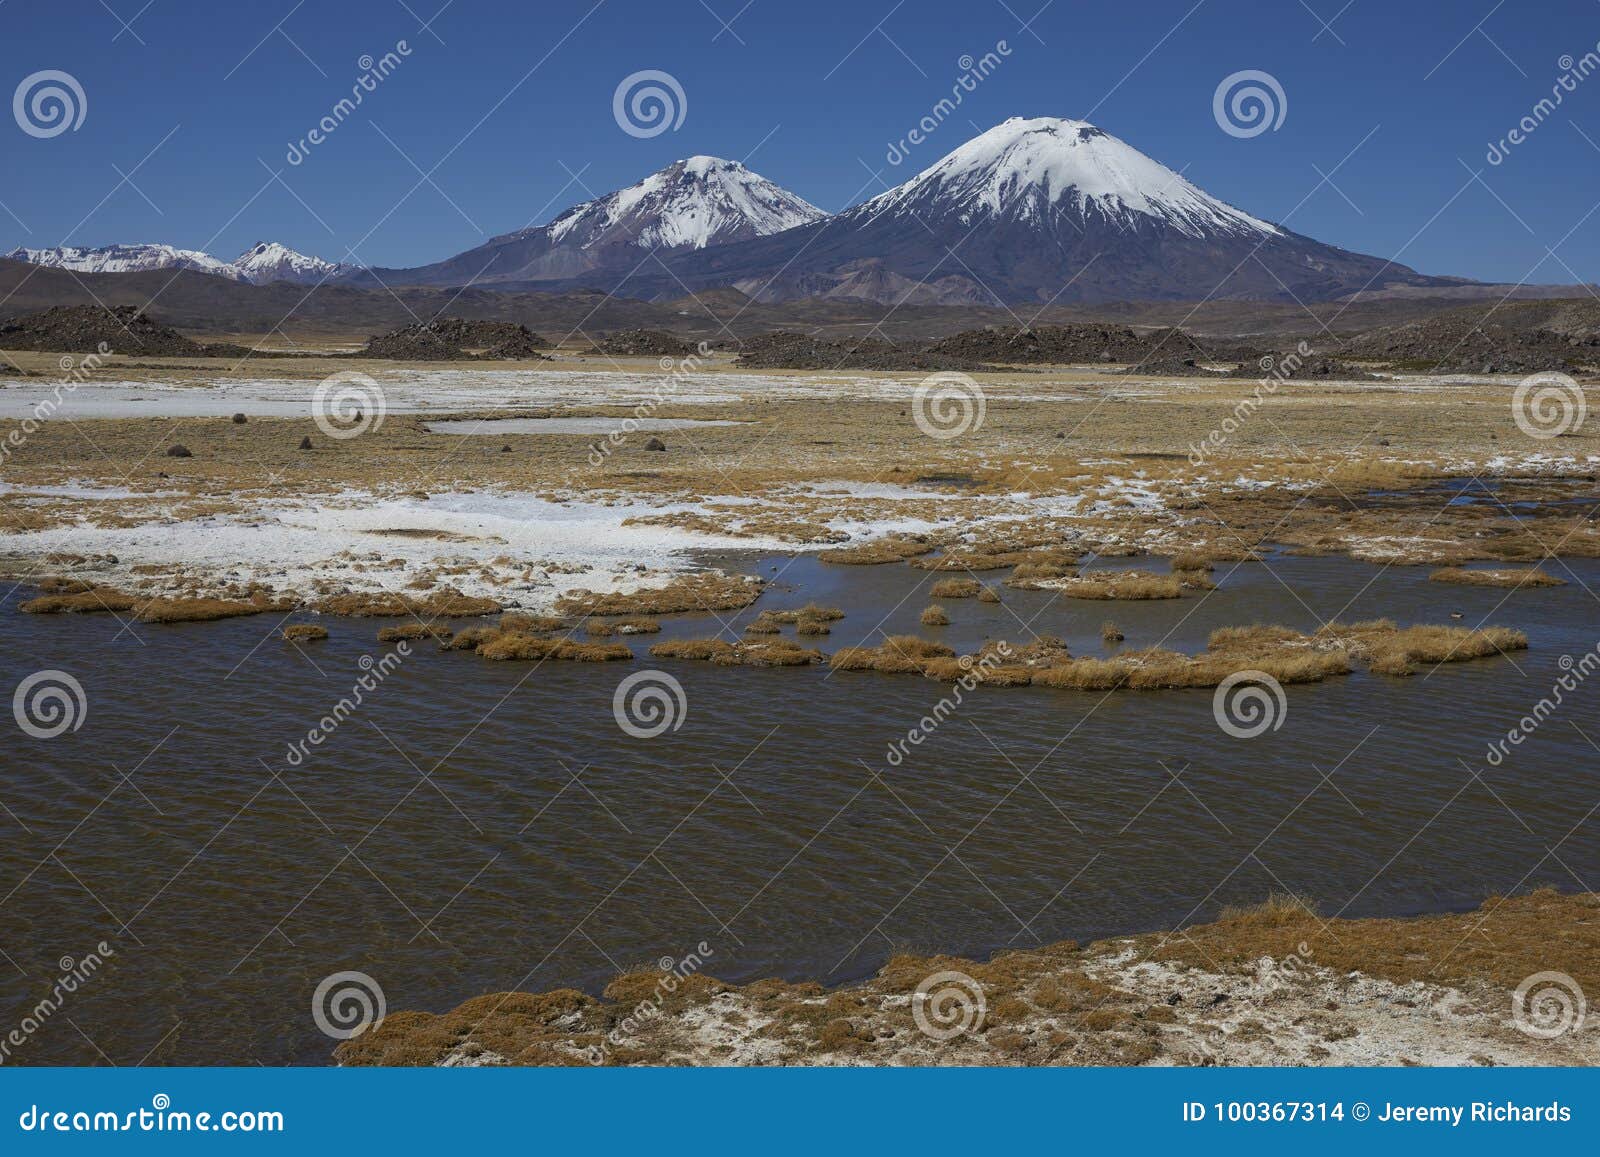 Volcanoes in Lauca National Park Stock Photo - Image of grass ...